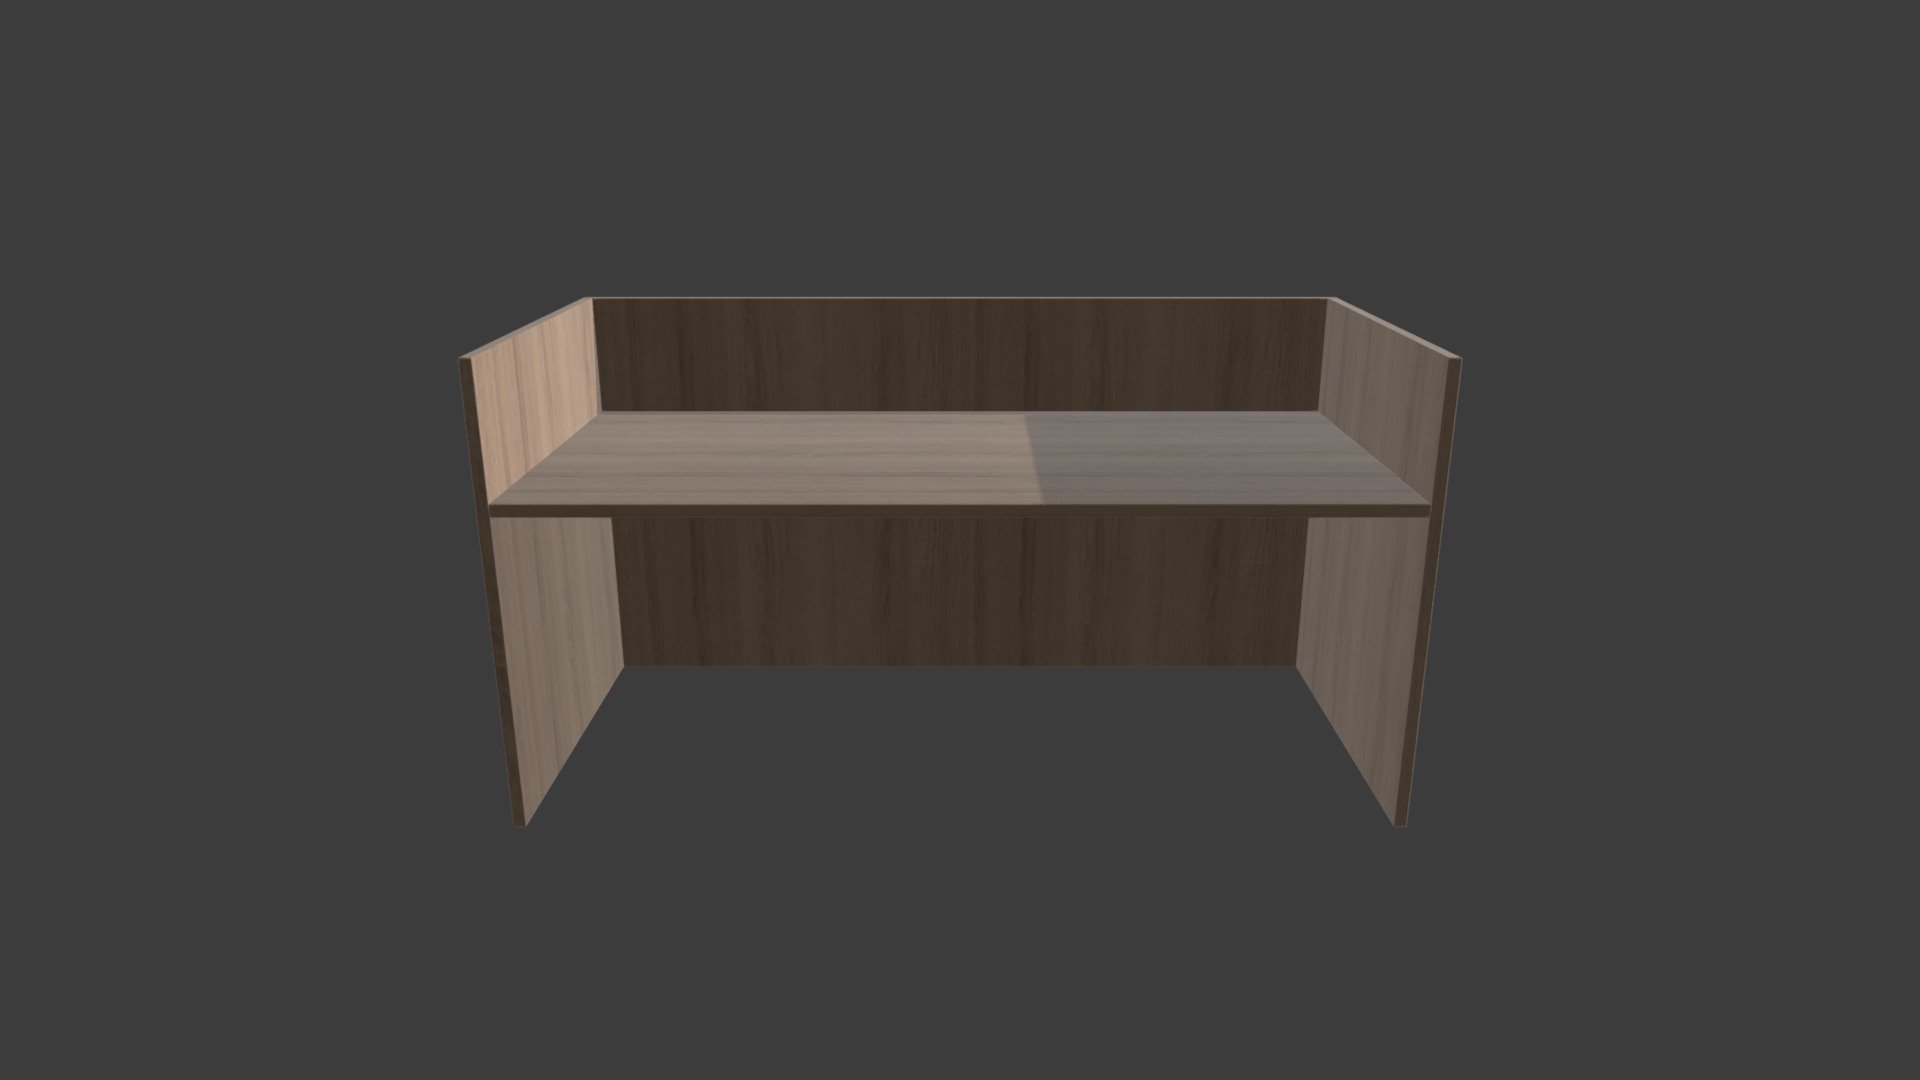 Brand &amp; Name: Darran Central Park Desk 6f. High detailed and optimized model for usage in photorealistic environments, architecture, vr and game ready. Baked PBR shaders &amp; textures in high texel density. Element IDs for easy shader customization - Darran Central Park Desk 6f - Buy Royalty Free 3D model by TMRWinc 3d model